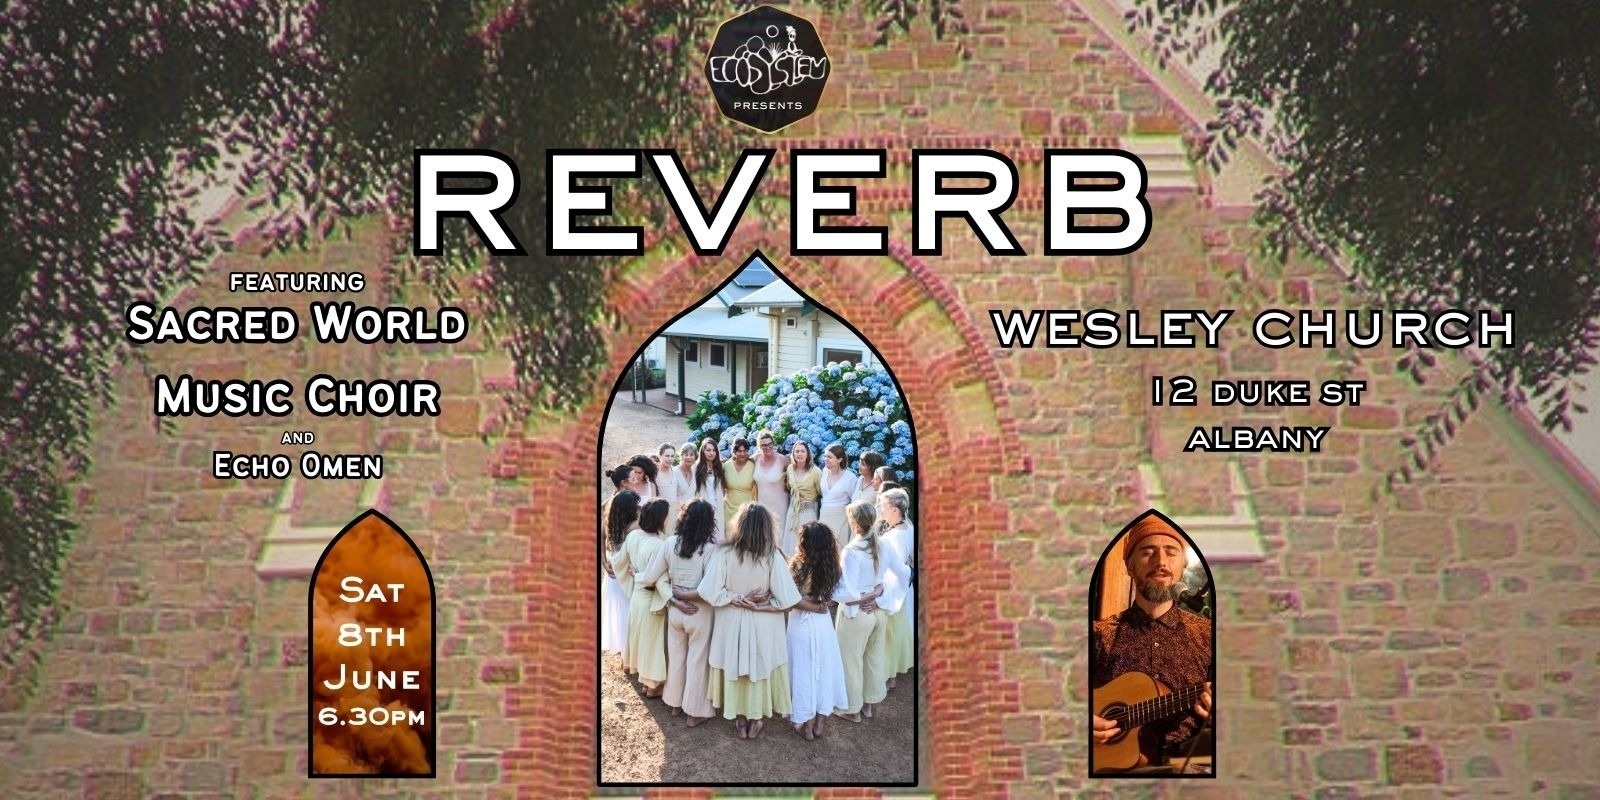 Banner image for REVERB (feat The Sacred World Music Choir & Echo Omen)